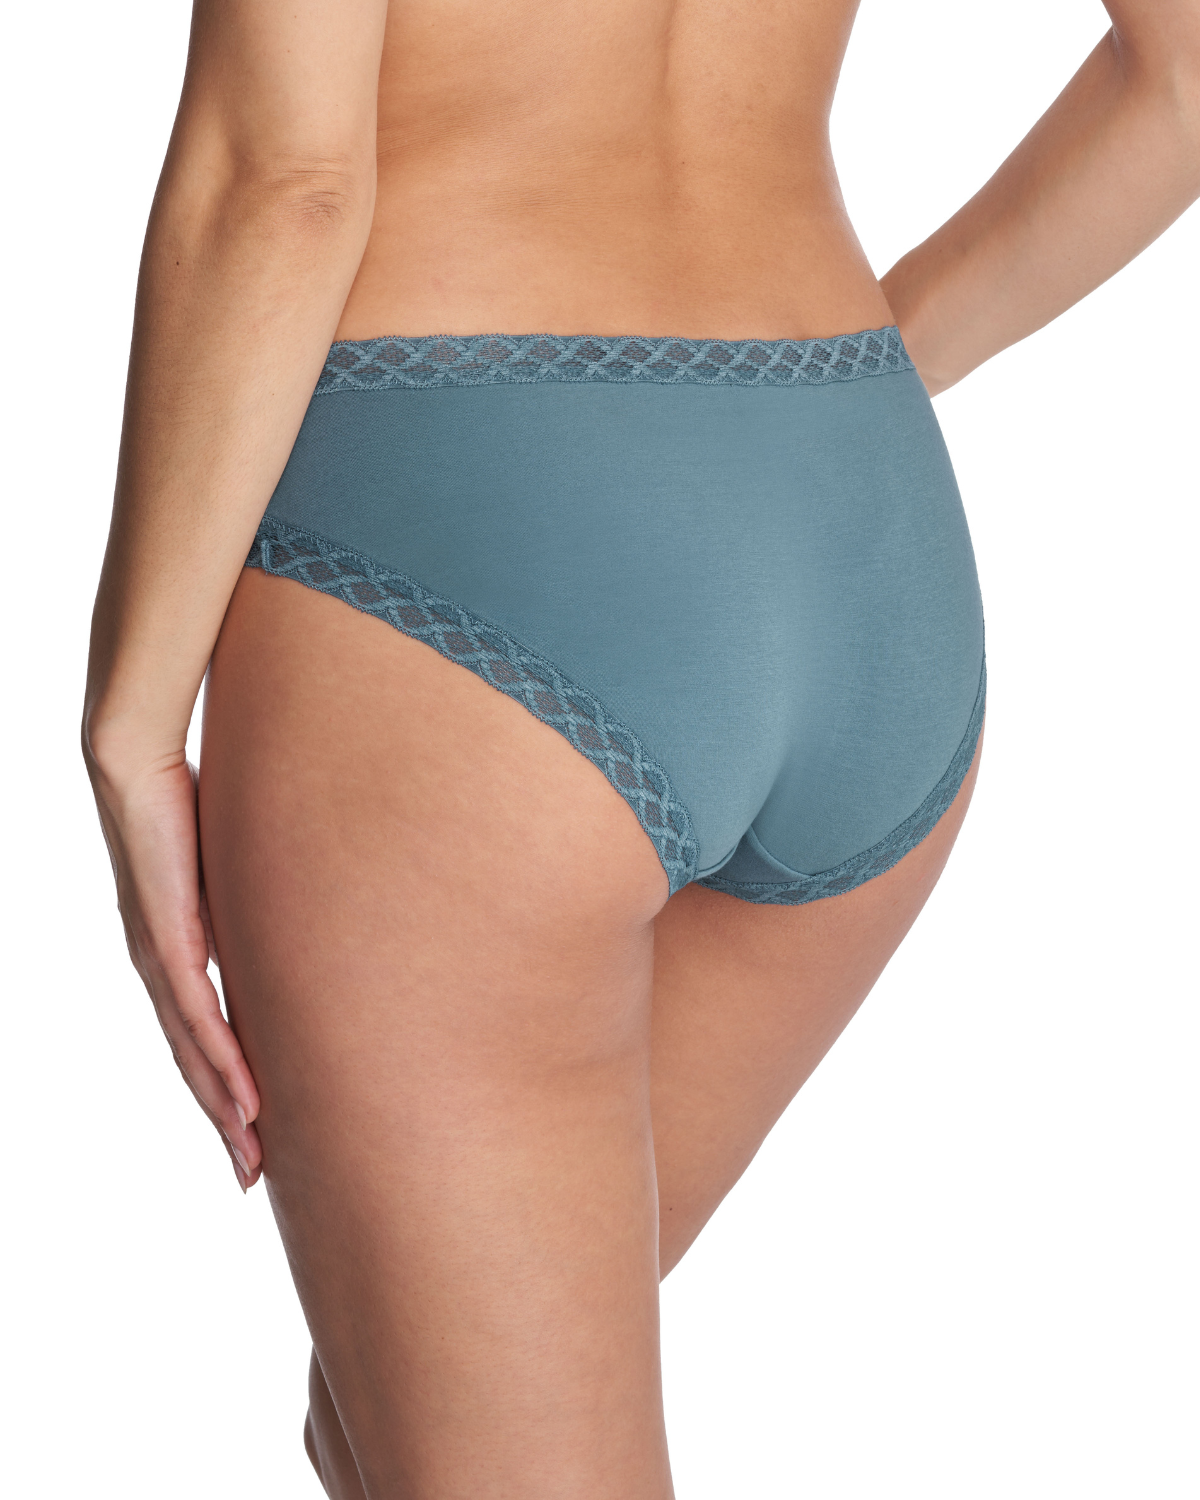 Model wearing a brief panty with lace trim in pale turquoise